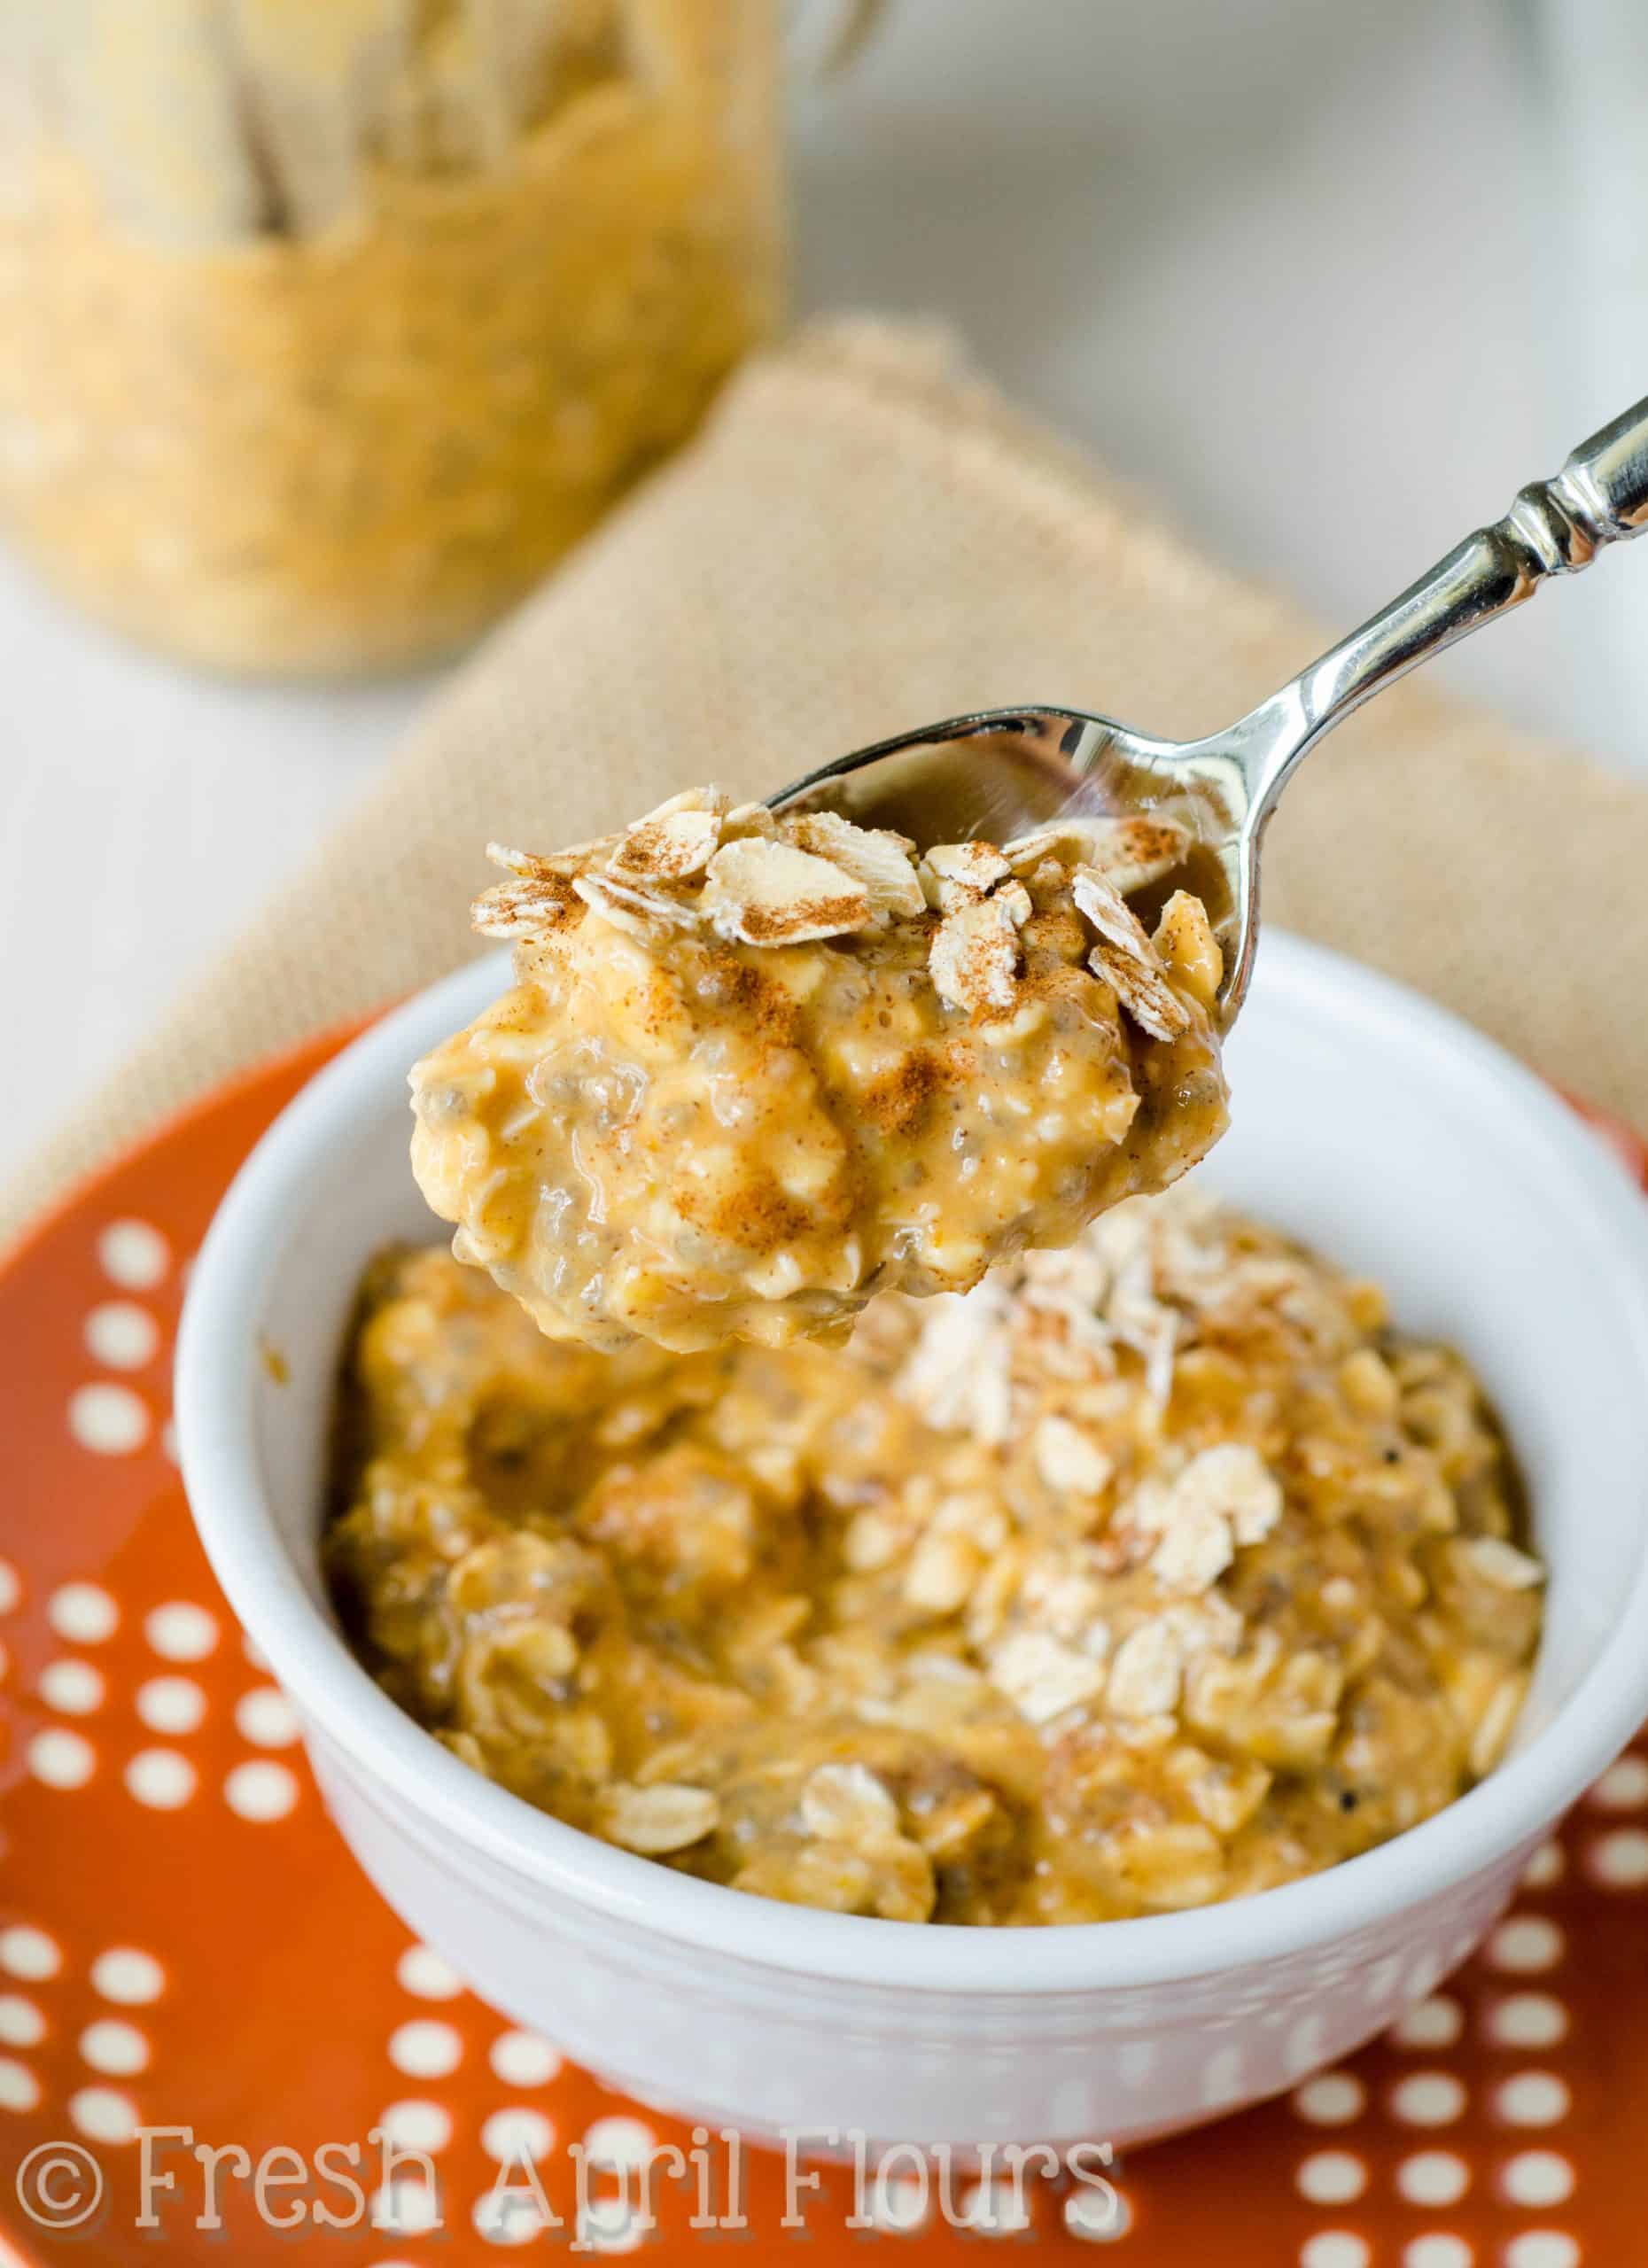 Pumpkin Overnight Oats: Hearty spiced oats that don't require any cooking!